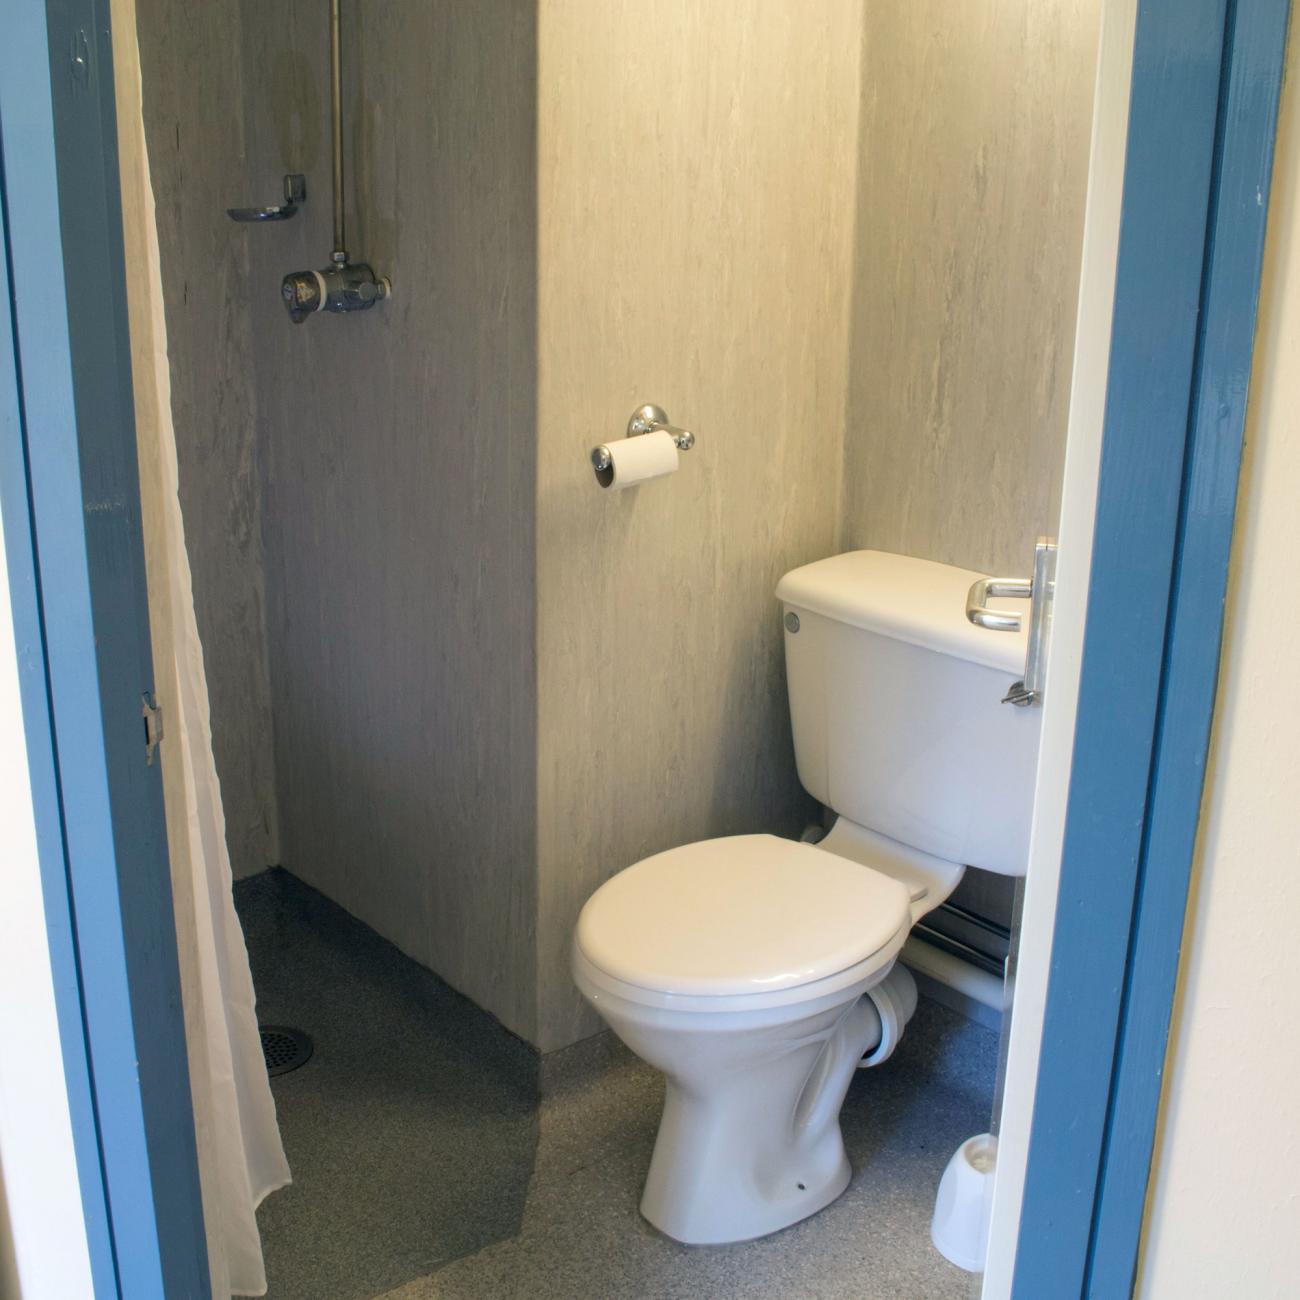 A bathroom containing a white toilet and shower cubicle area.